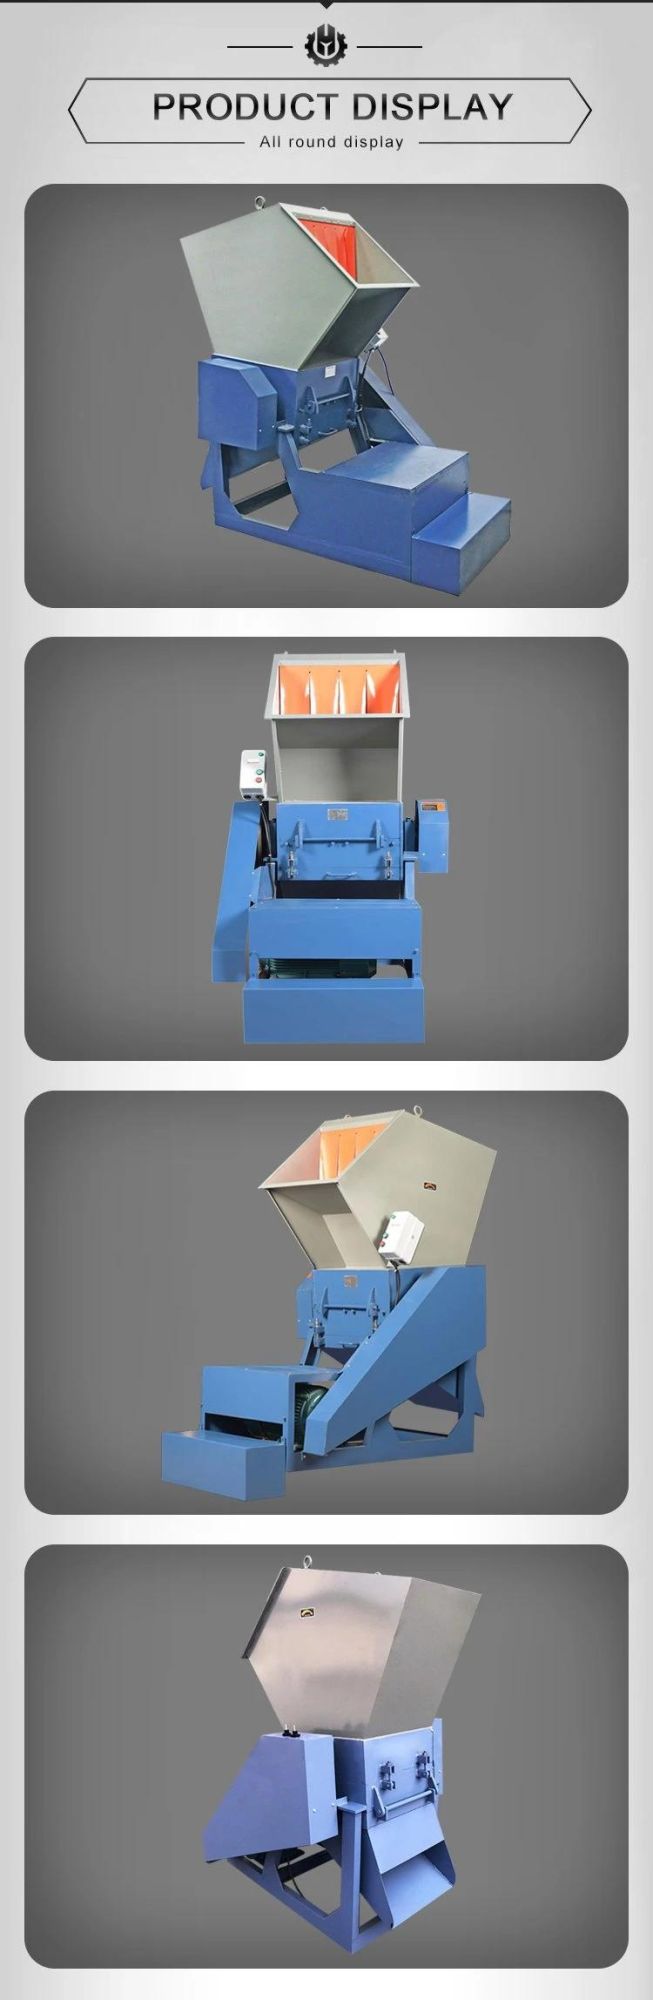 Large Hollow Plastic Crusher Machine for Soft Plastics Grind Block Round and Strip Shaped Waste Plastic Crushing and Pelletizing